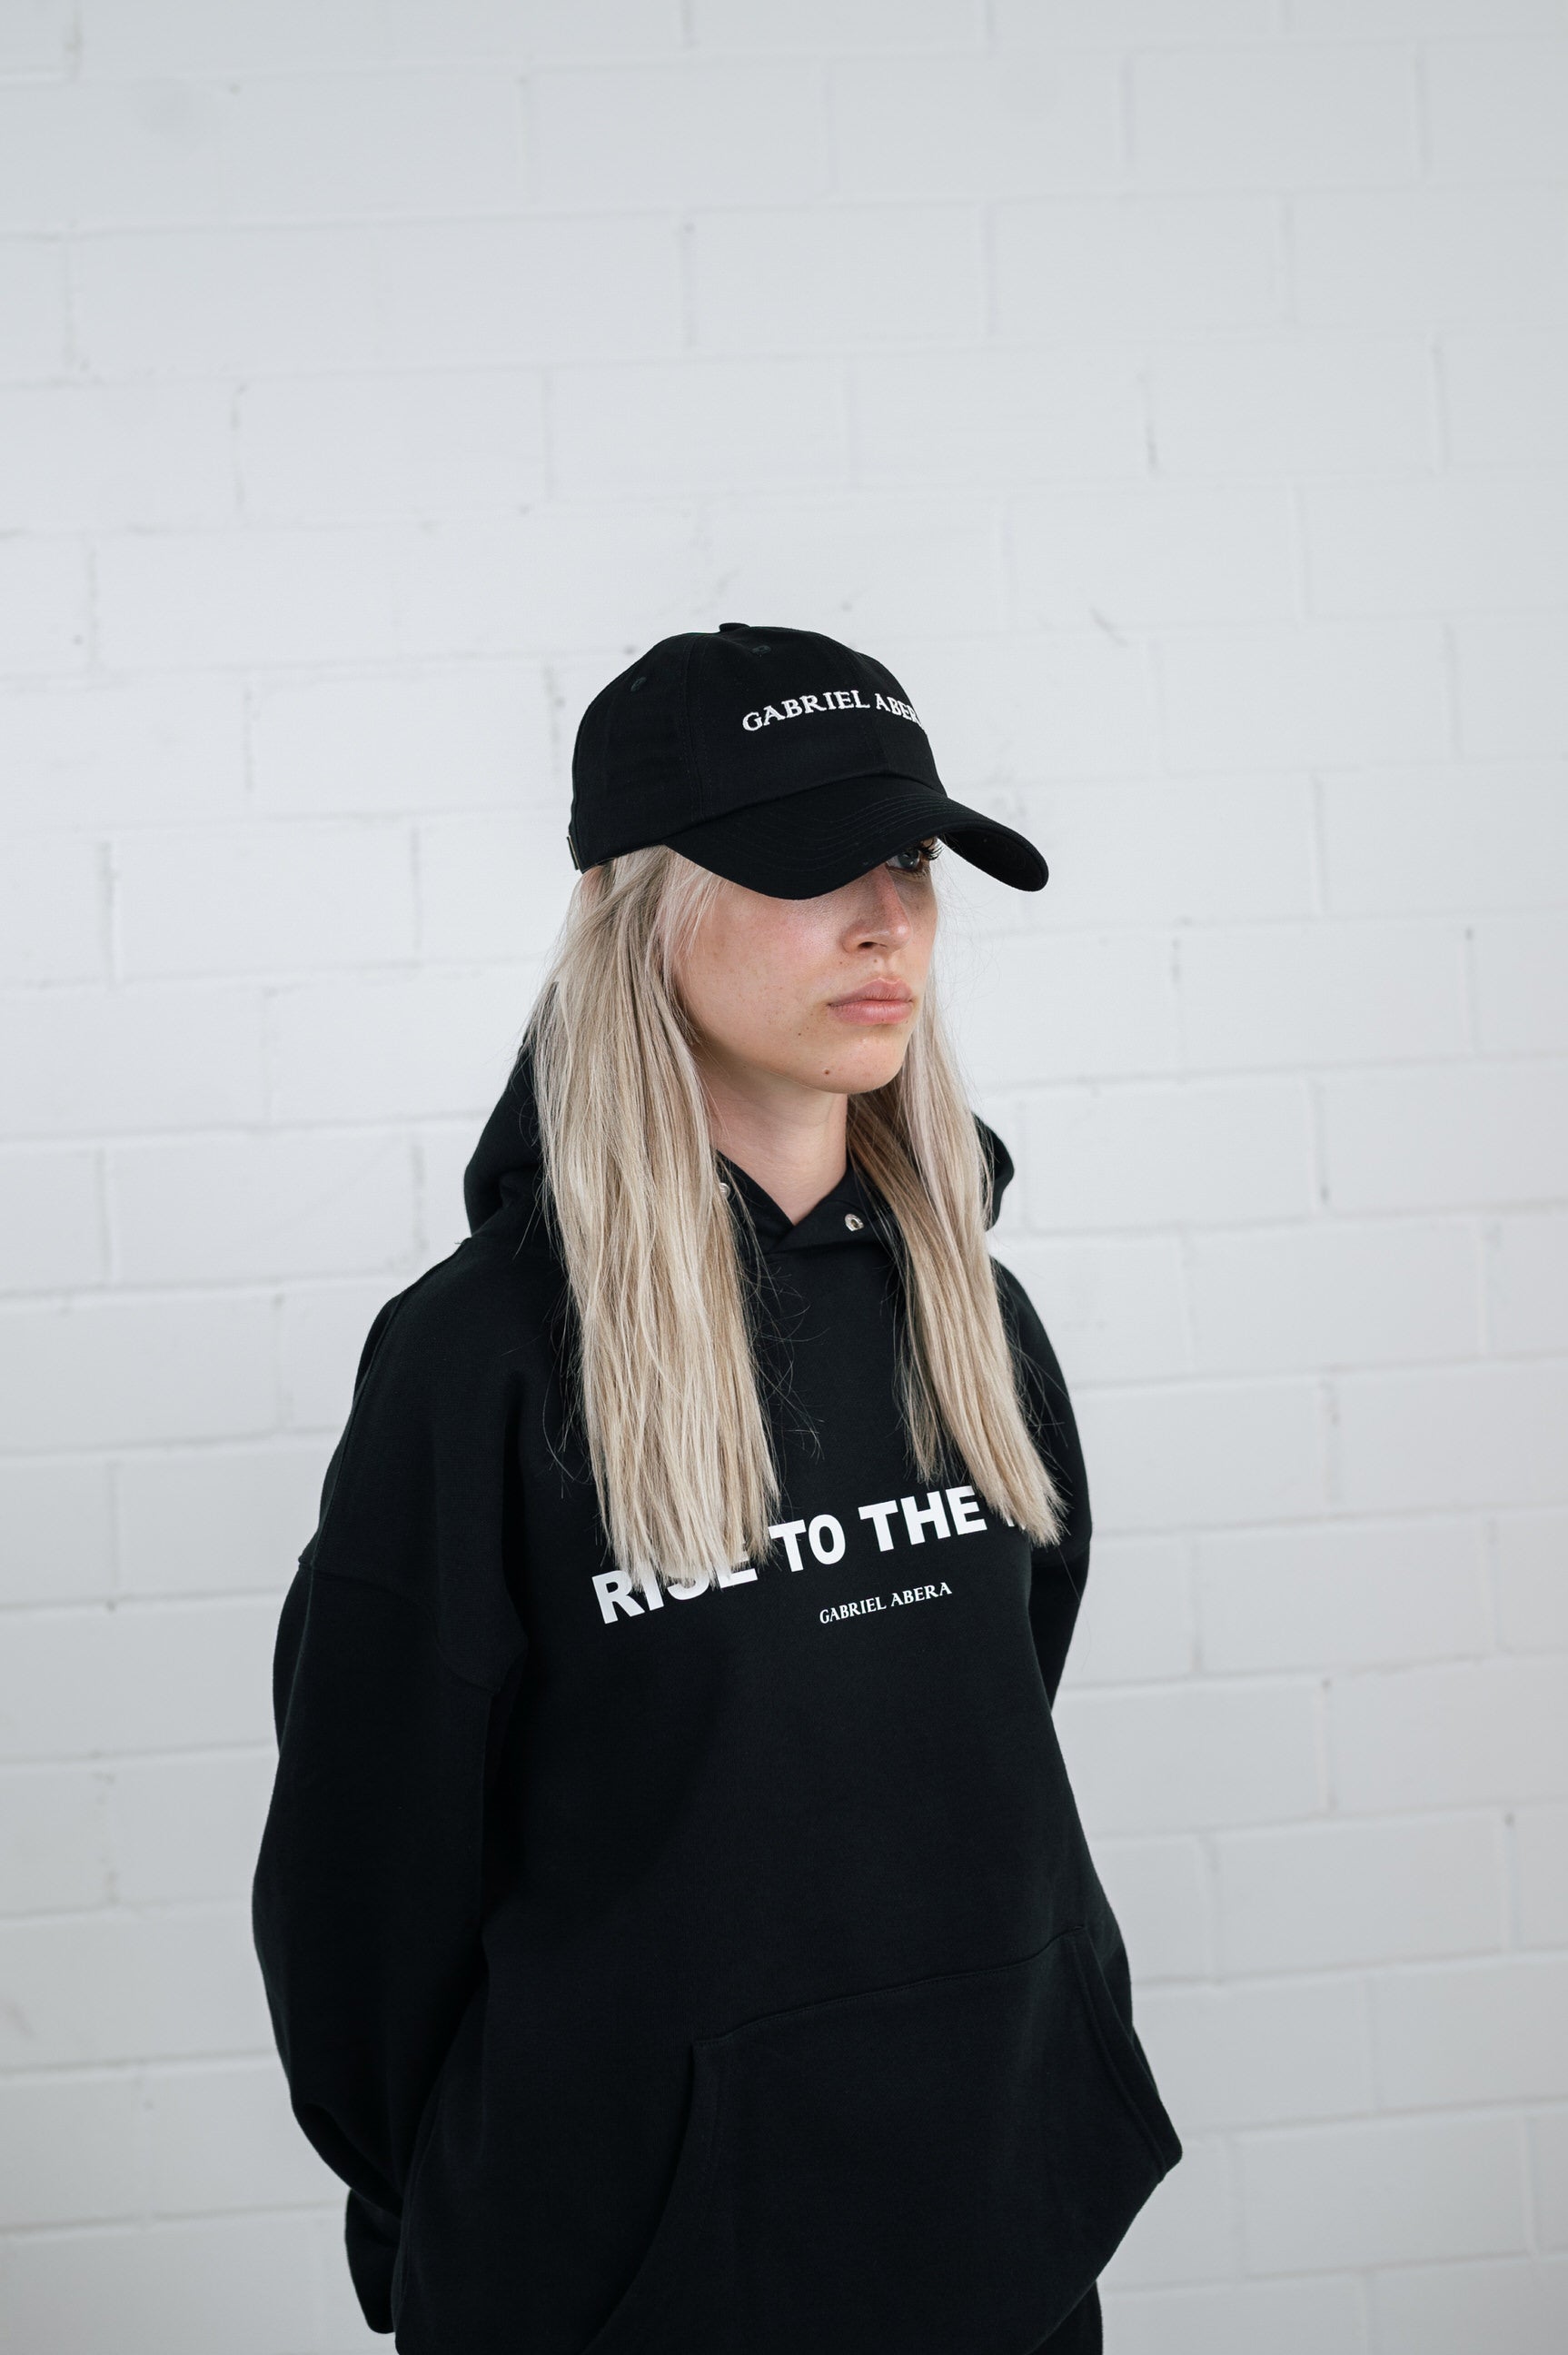 Female model wearing a Black cap with brand name embroidery